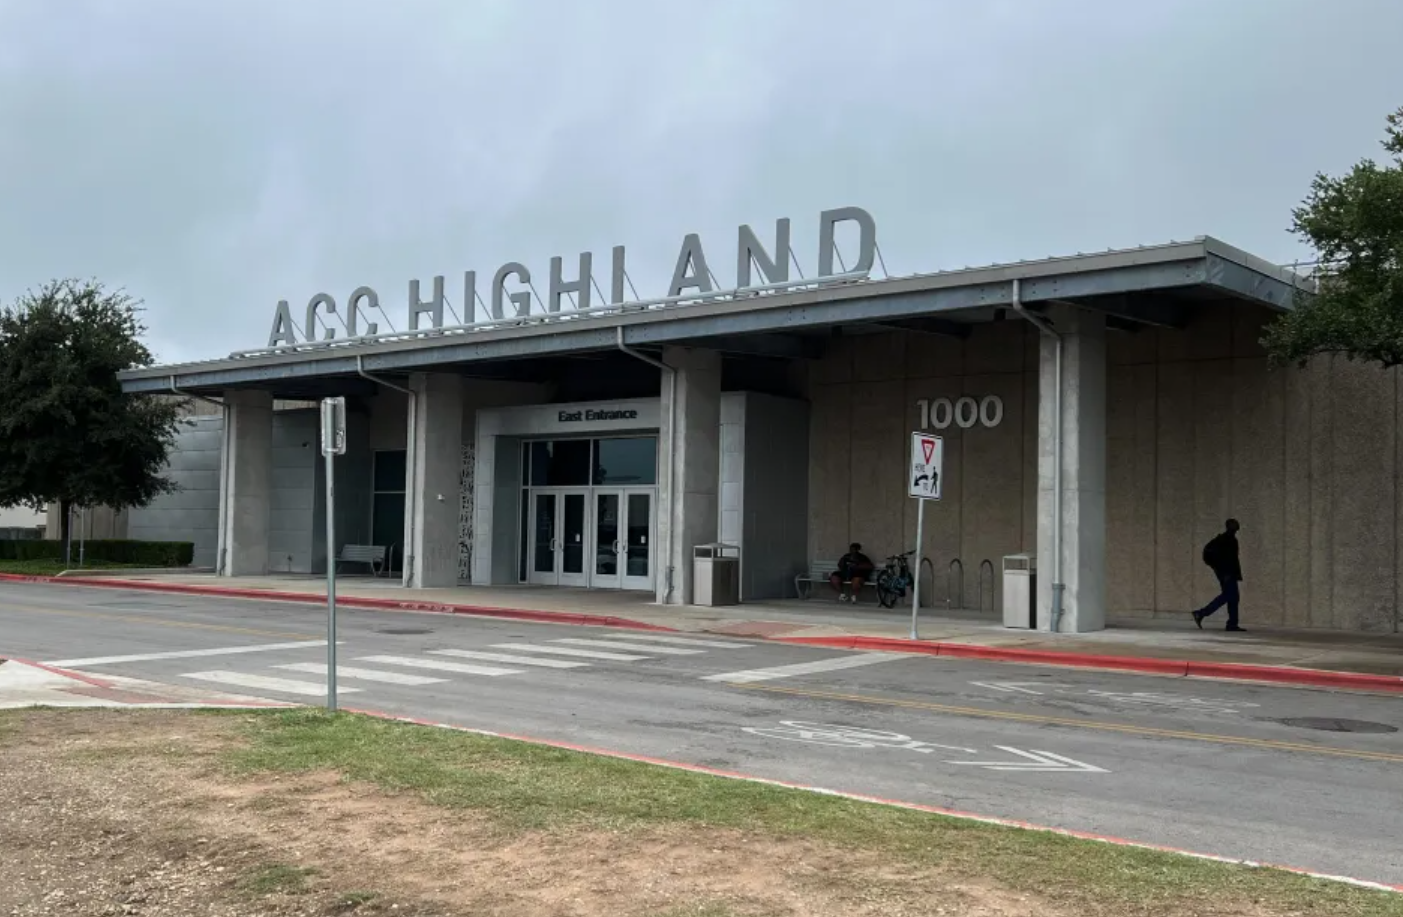 ACC Highland — Welcome Center